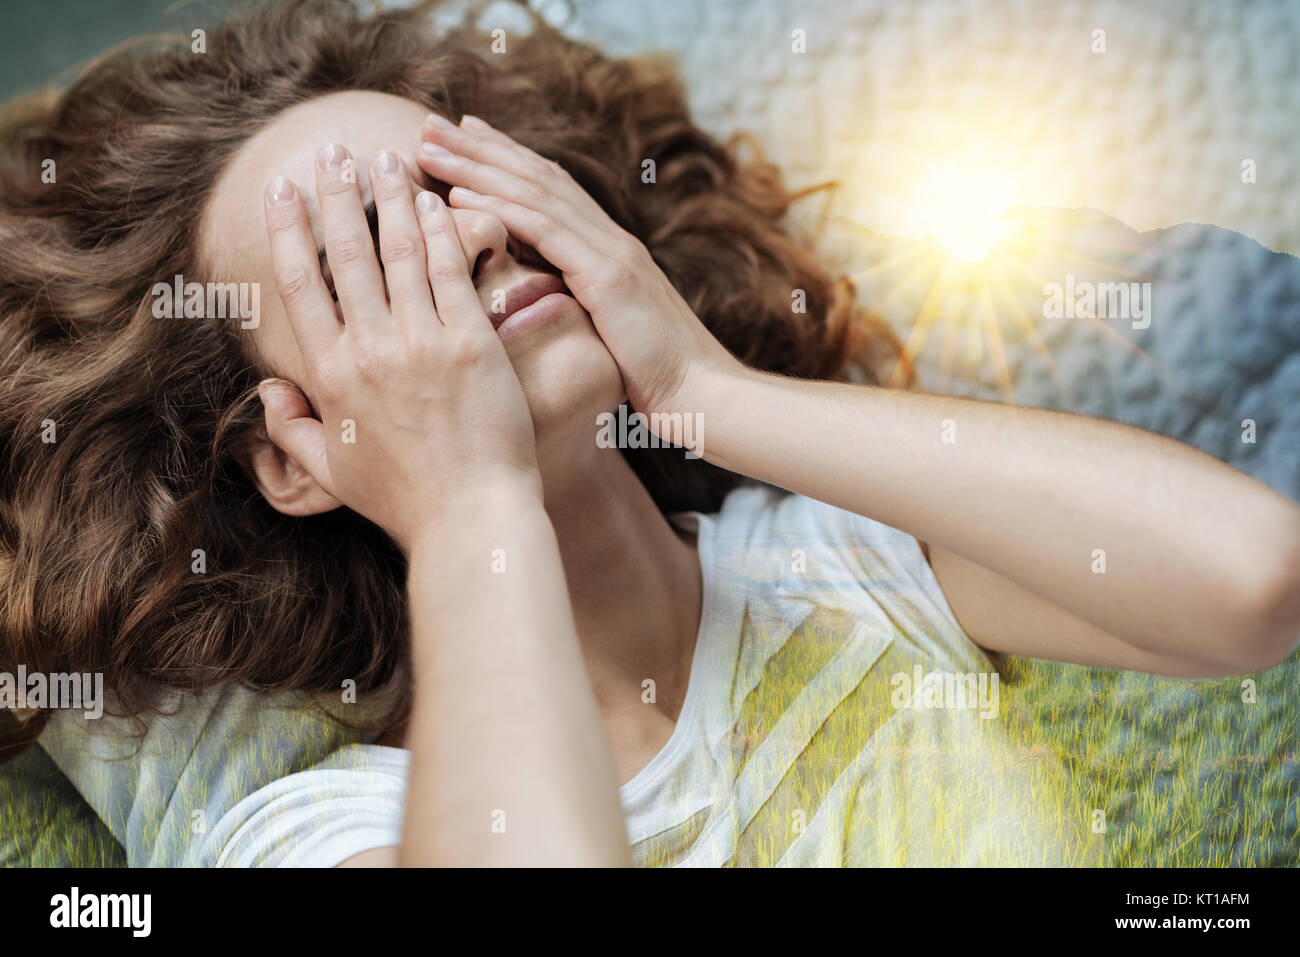 Tired woman putting hands on her face Stock Photo